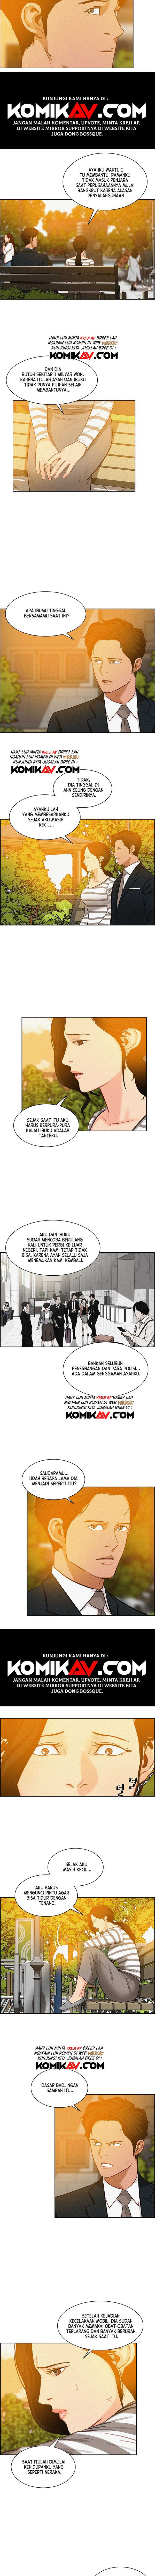 Lord Of Money Chapter 21